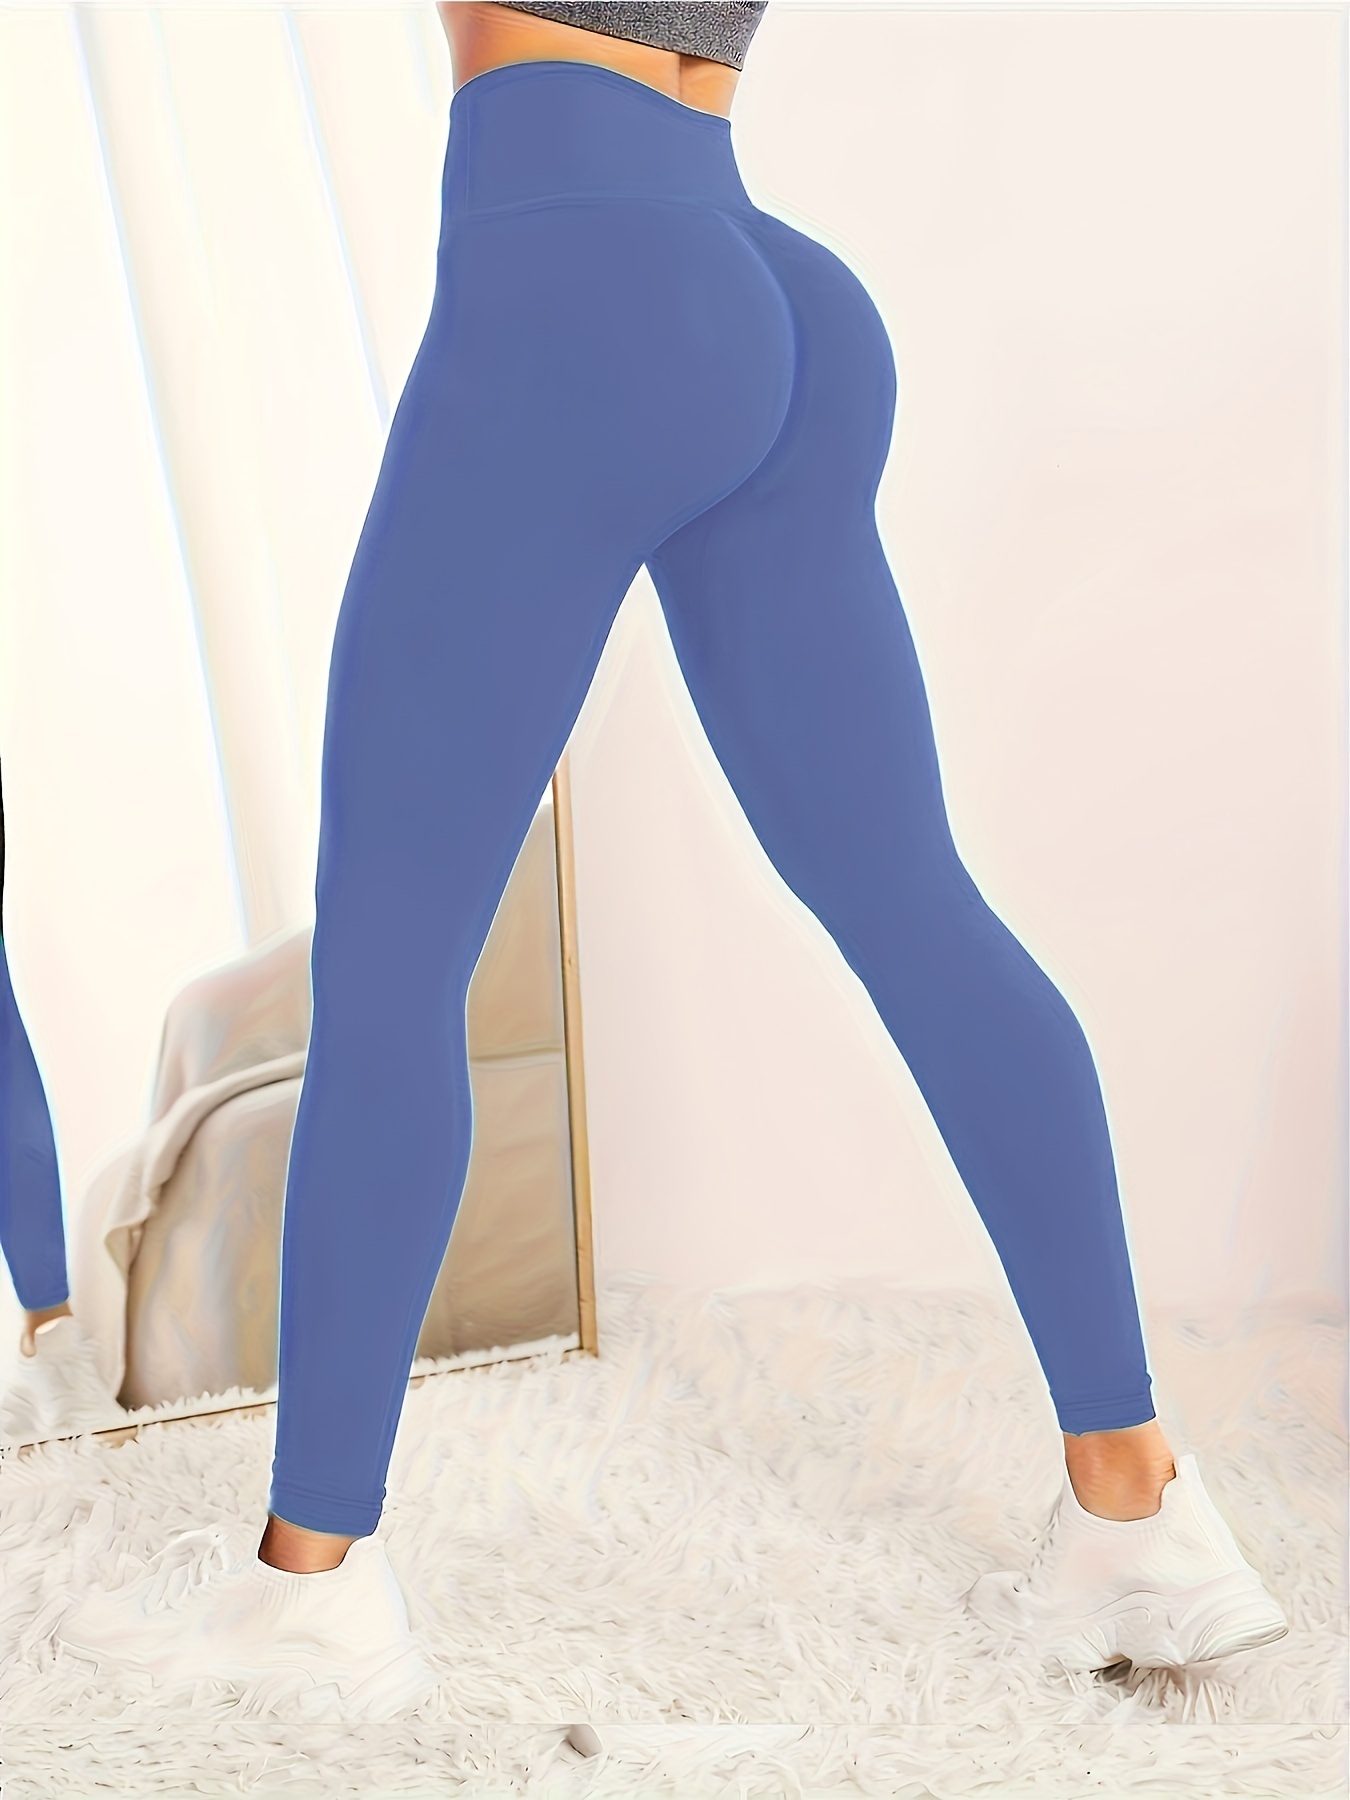 Leggings High Waist Yoga Stretch Pants Fitness Sports Woman Outfits, Blue, S